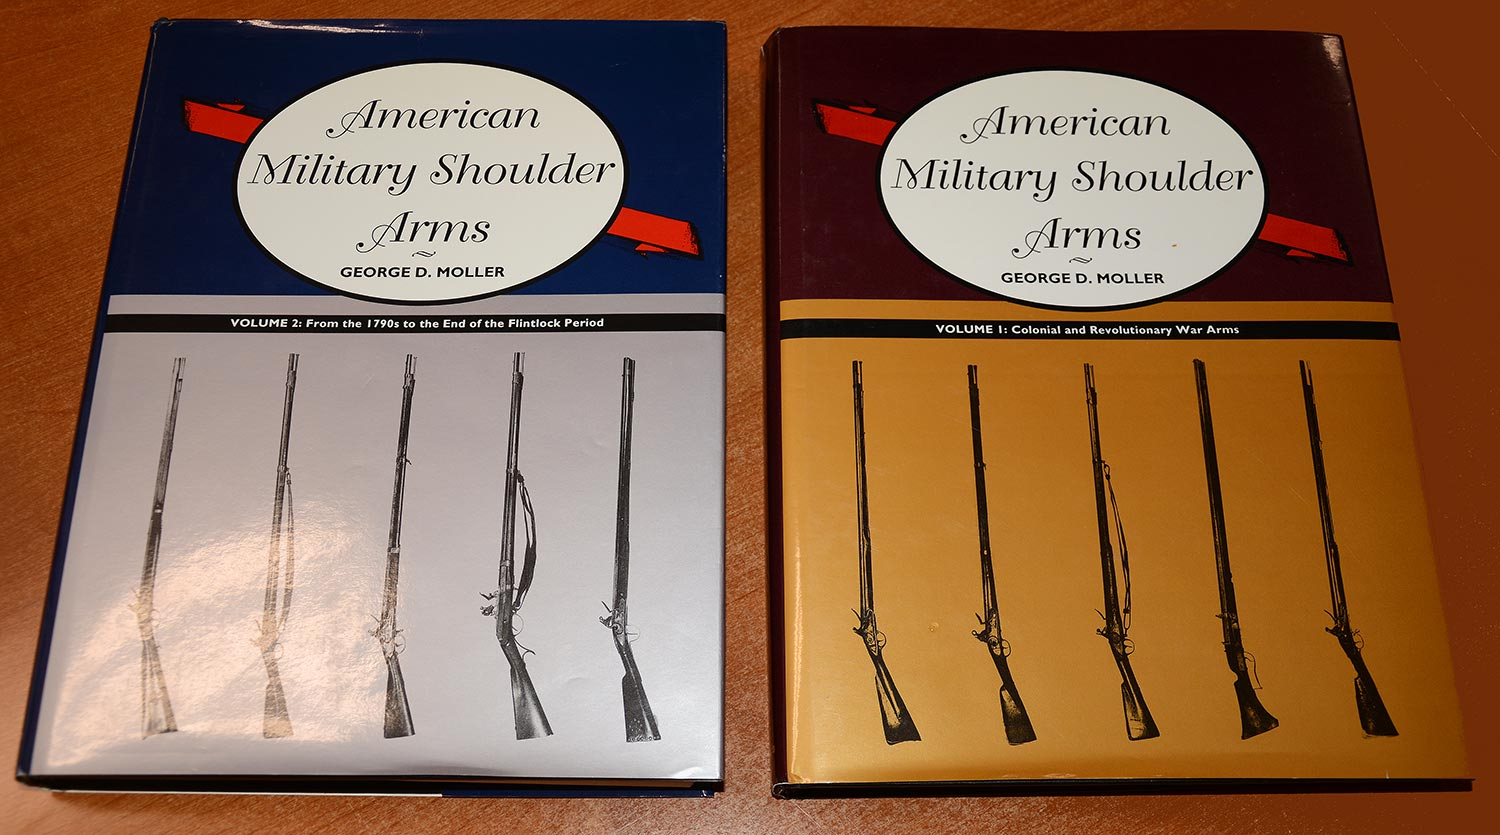 AUTOGRAPHED 2 VOLUME SET OF AMERICAN MILITARY SHOULDER ARMS BY GEORGE D. MOLLER